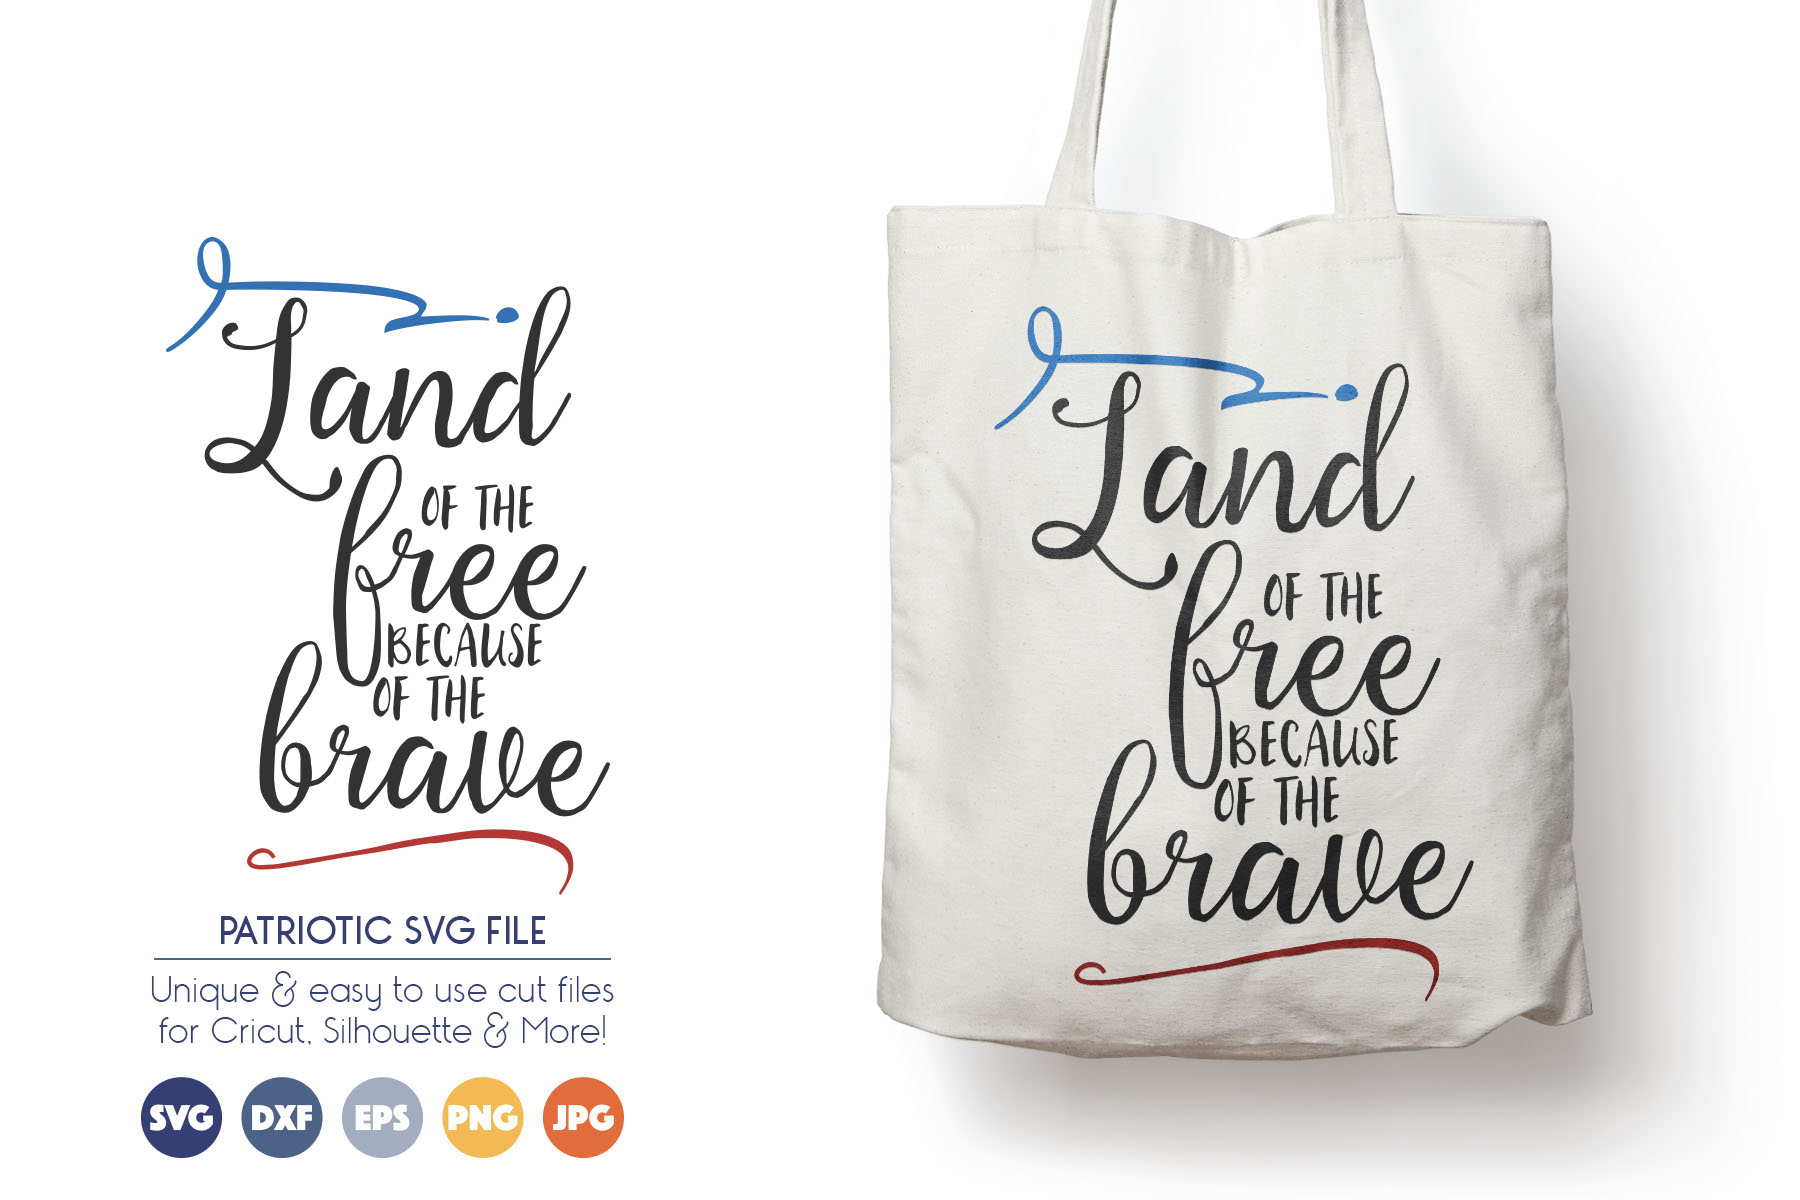 Download Patriotic SVG Cut Files - Land of Free Because of the Brave